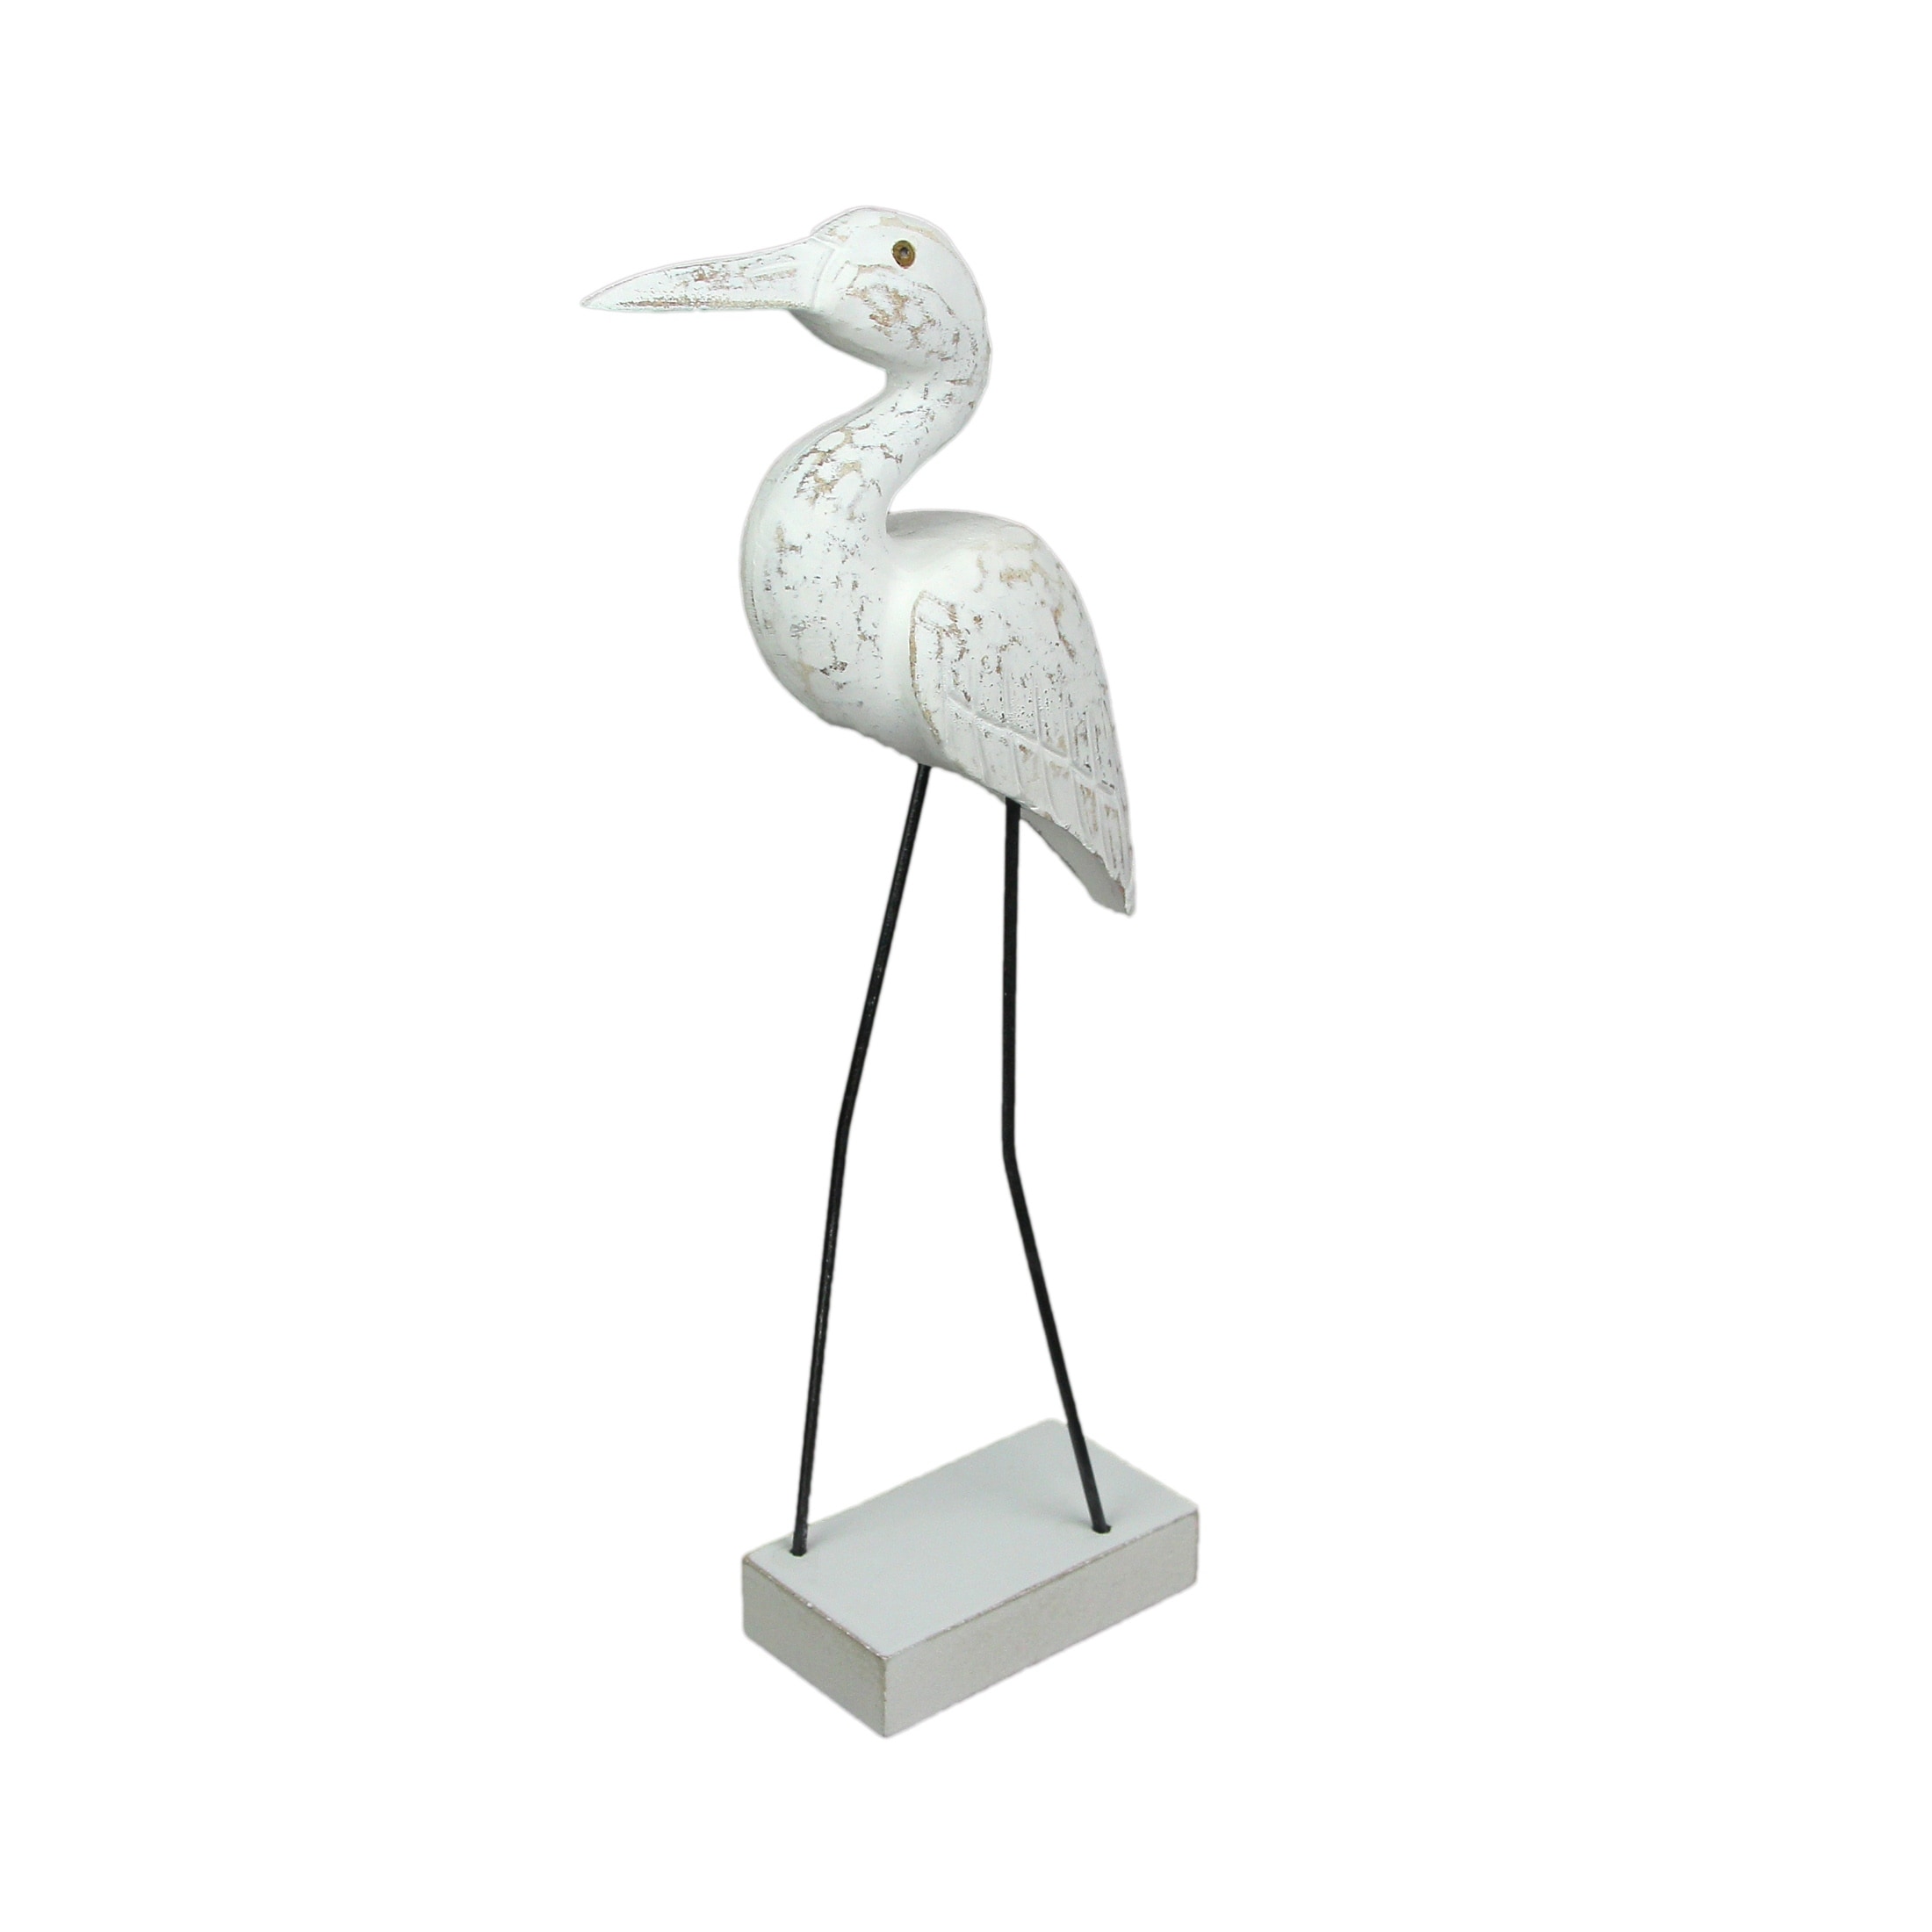 https://ak1.ostkcdn.com/images/products/is/images/direct/9d78d3d4f1162cb62ec8cfcb1a78ff879b13a8f8/Hand-Carved-Wood-and-Metal-White-Egret-Bird-Statue-15-Inches-High.jpg